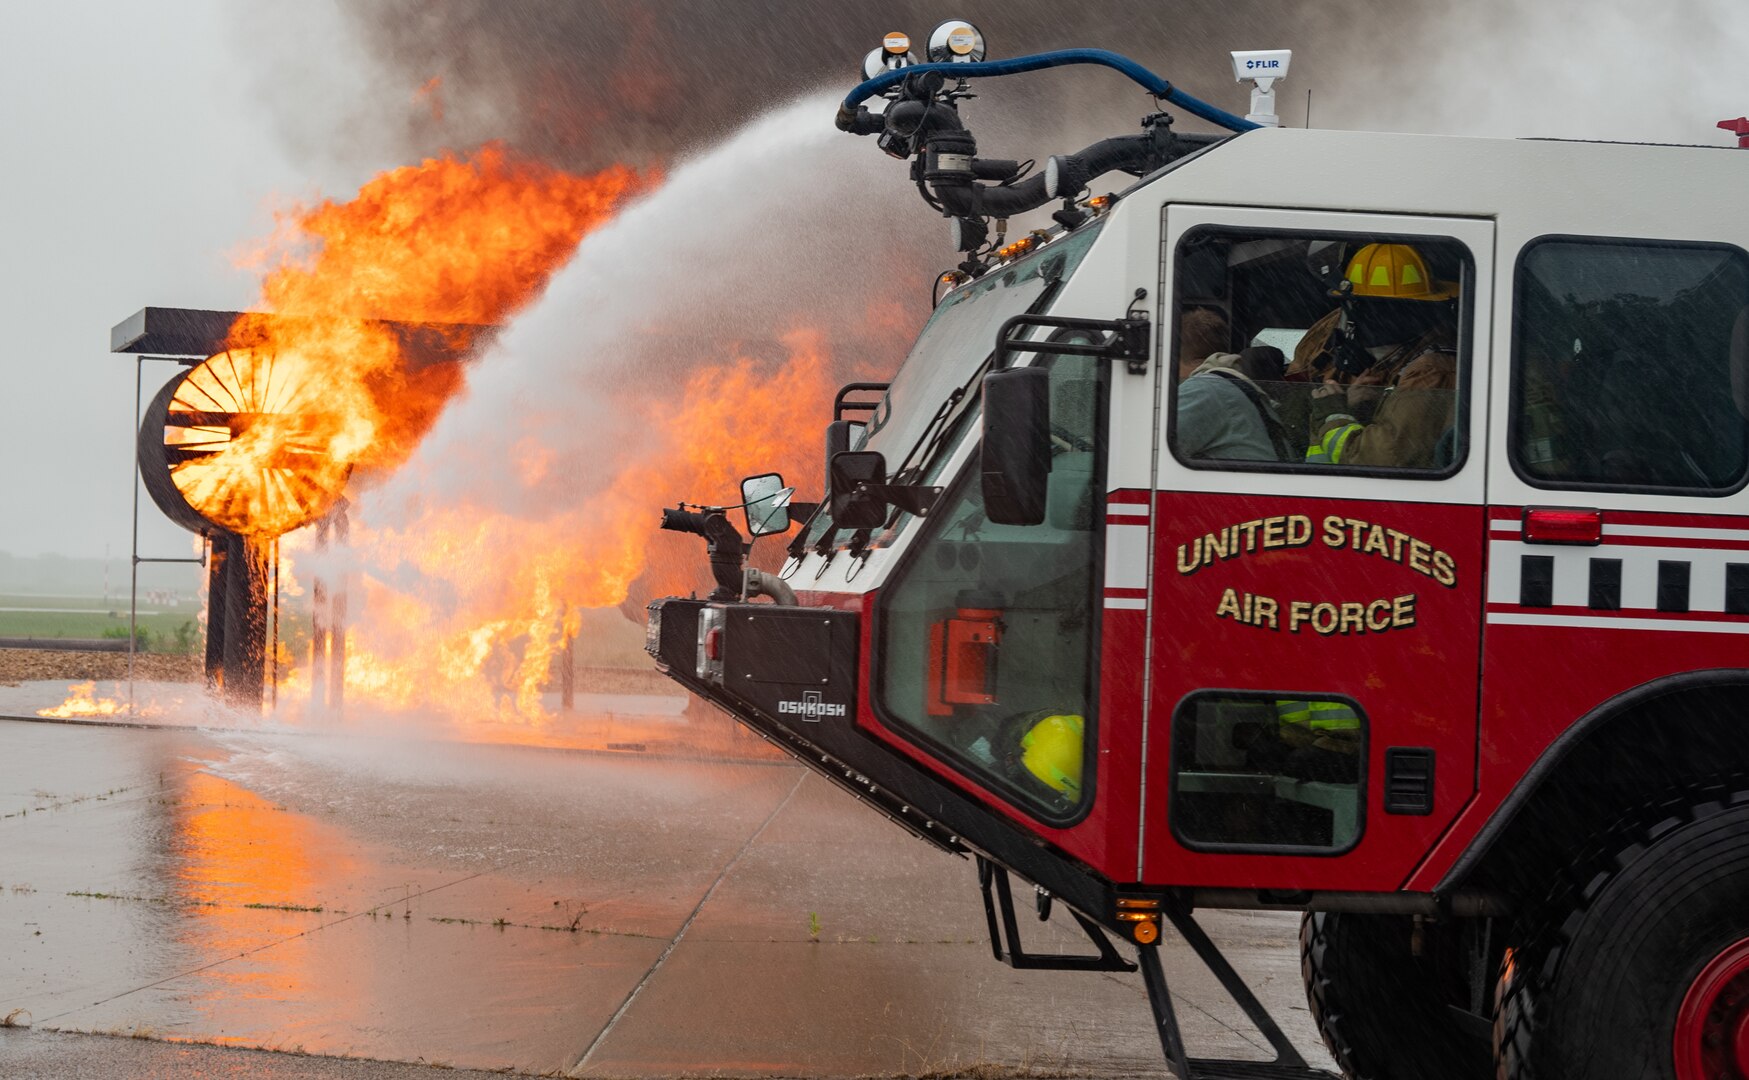 Nevada Air National Guard 152nd Civil Engineer Squadron fire protection specialists utilize an Oshkosh Striker with a mounted water turret to extinguish a fire on a C-130 aircraft frame during a live-burn exercise at Volk Field Air National Guard Base in Wisconsin July 7, 2021.